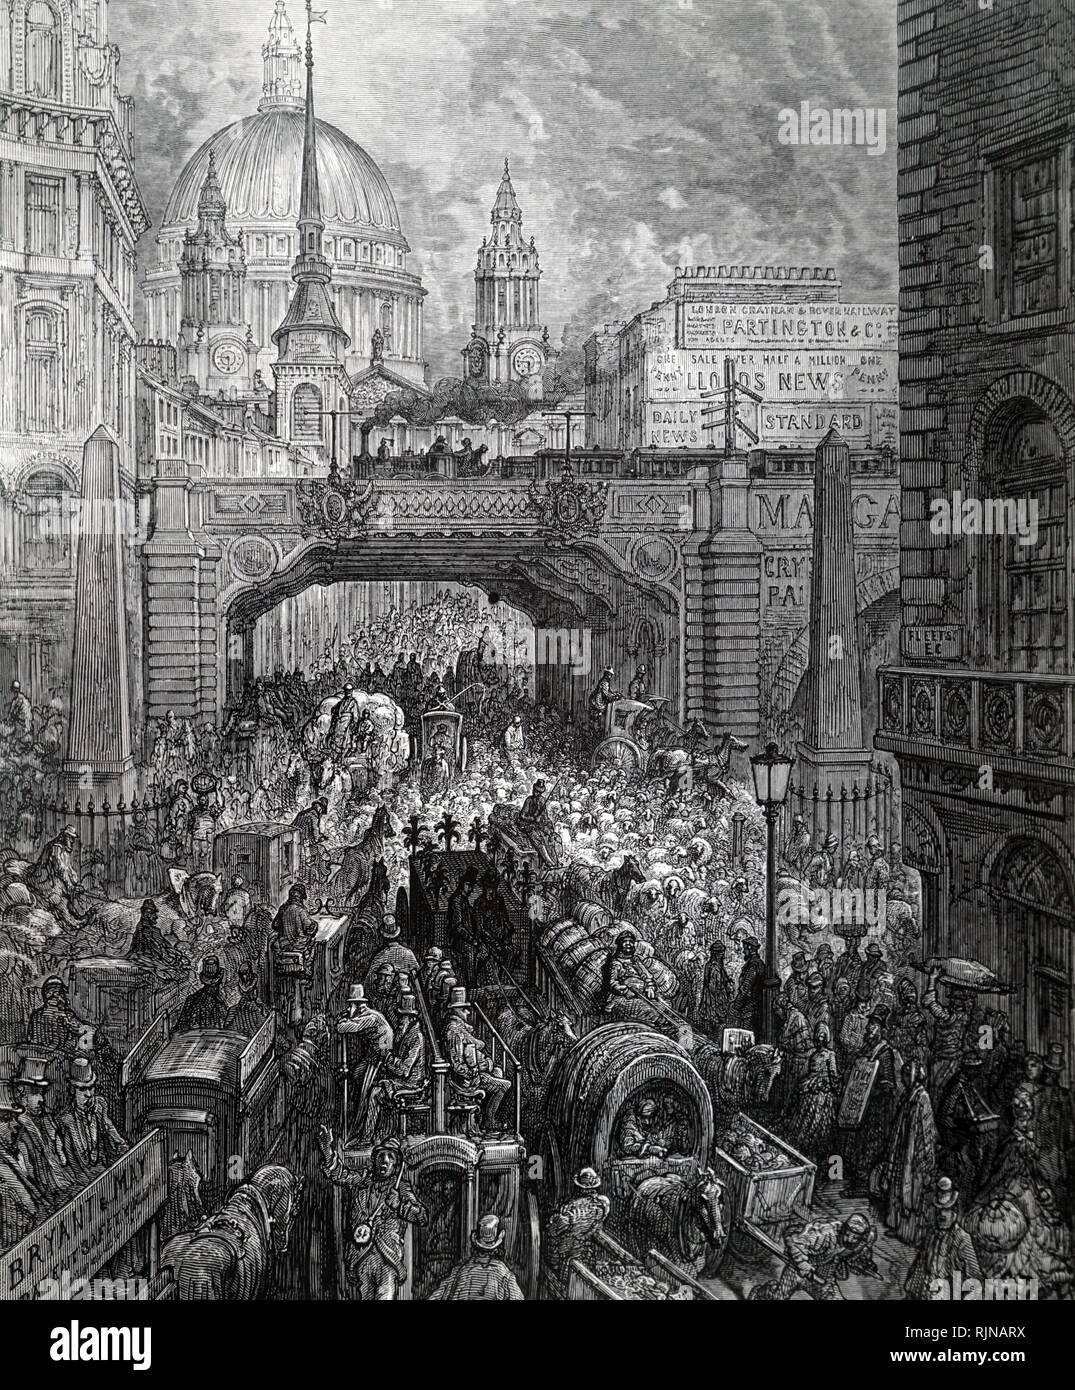 An engraving depicting Ludgate Circus from the bottom of Fleet Street, looking up Ludgate Hill towards St Pauls. Dated 19th century Stock Photo